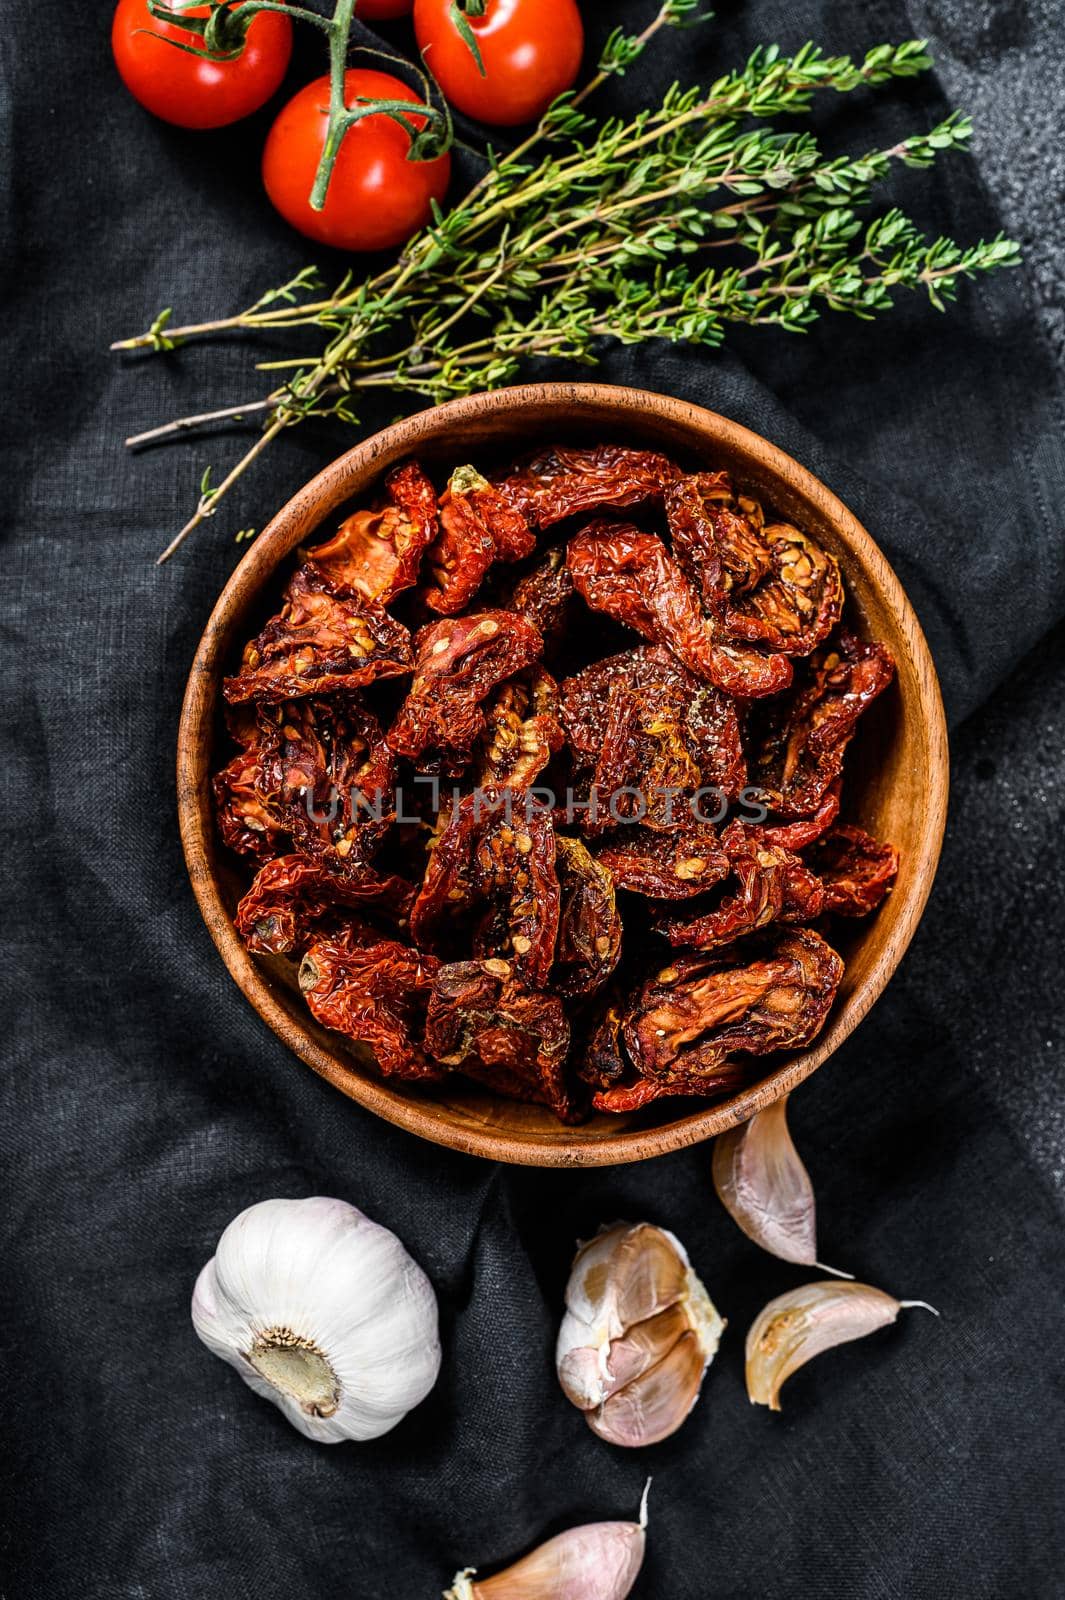 Dried tomatoes with garlic, spices and herbs. Recipe for cooking with ingredients. Black, dark background. Top view by Composter